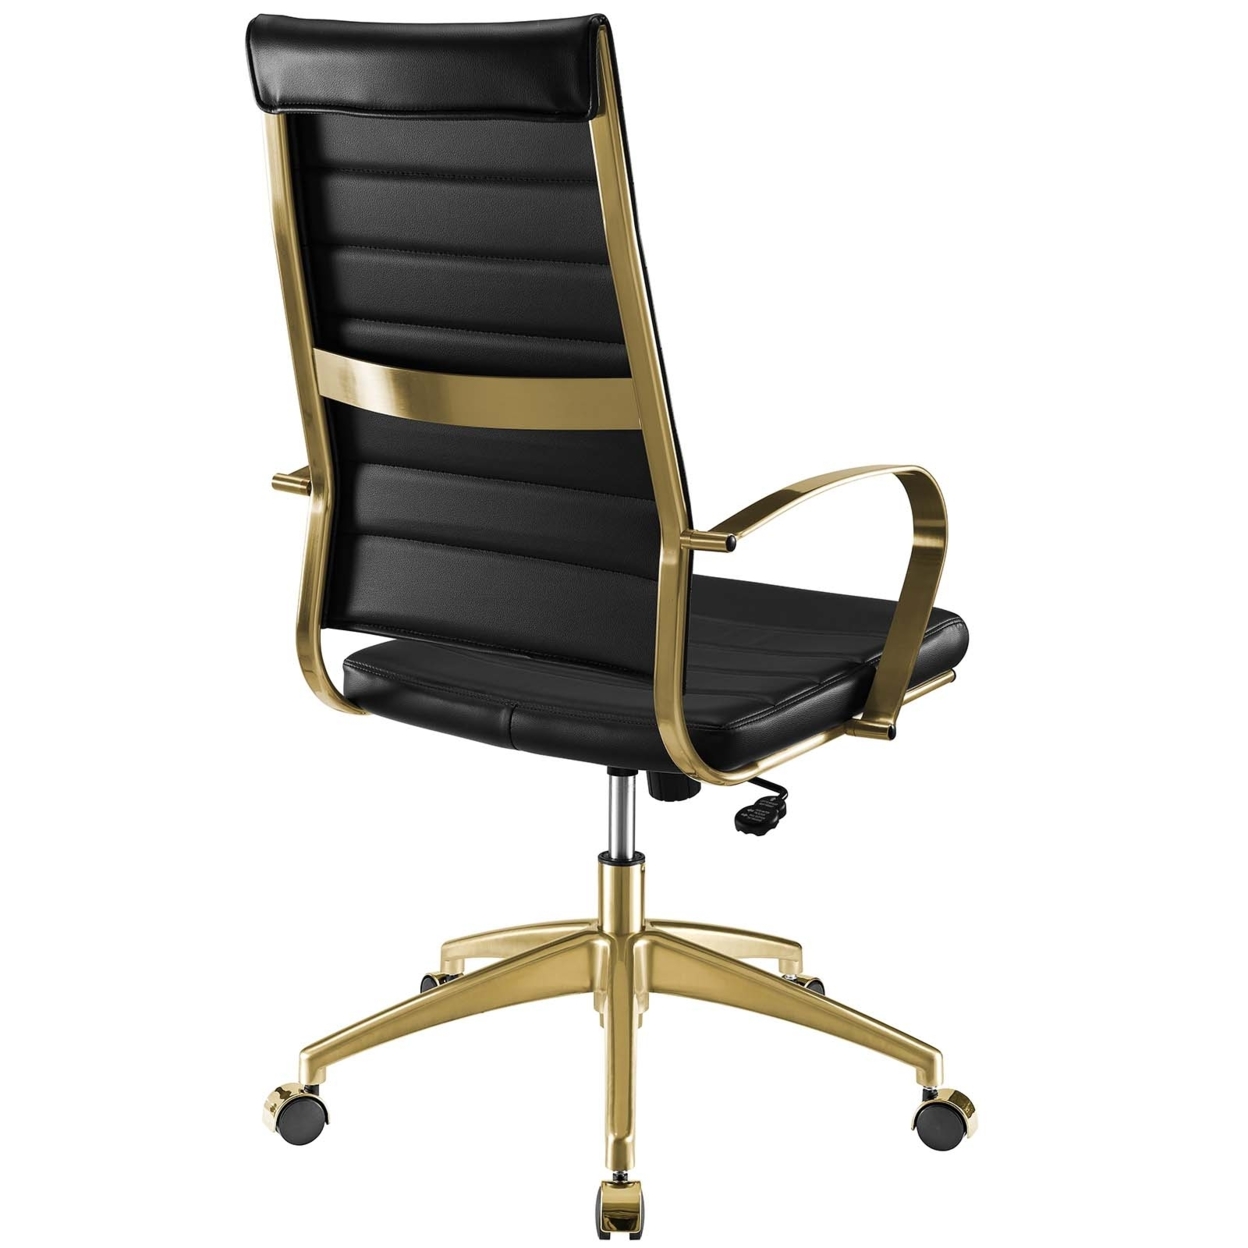 Jive Gold Stainless Steel Highback Office Chair,Gold Black